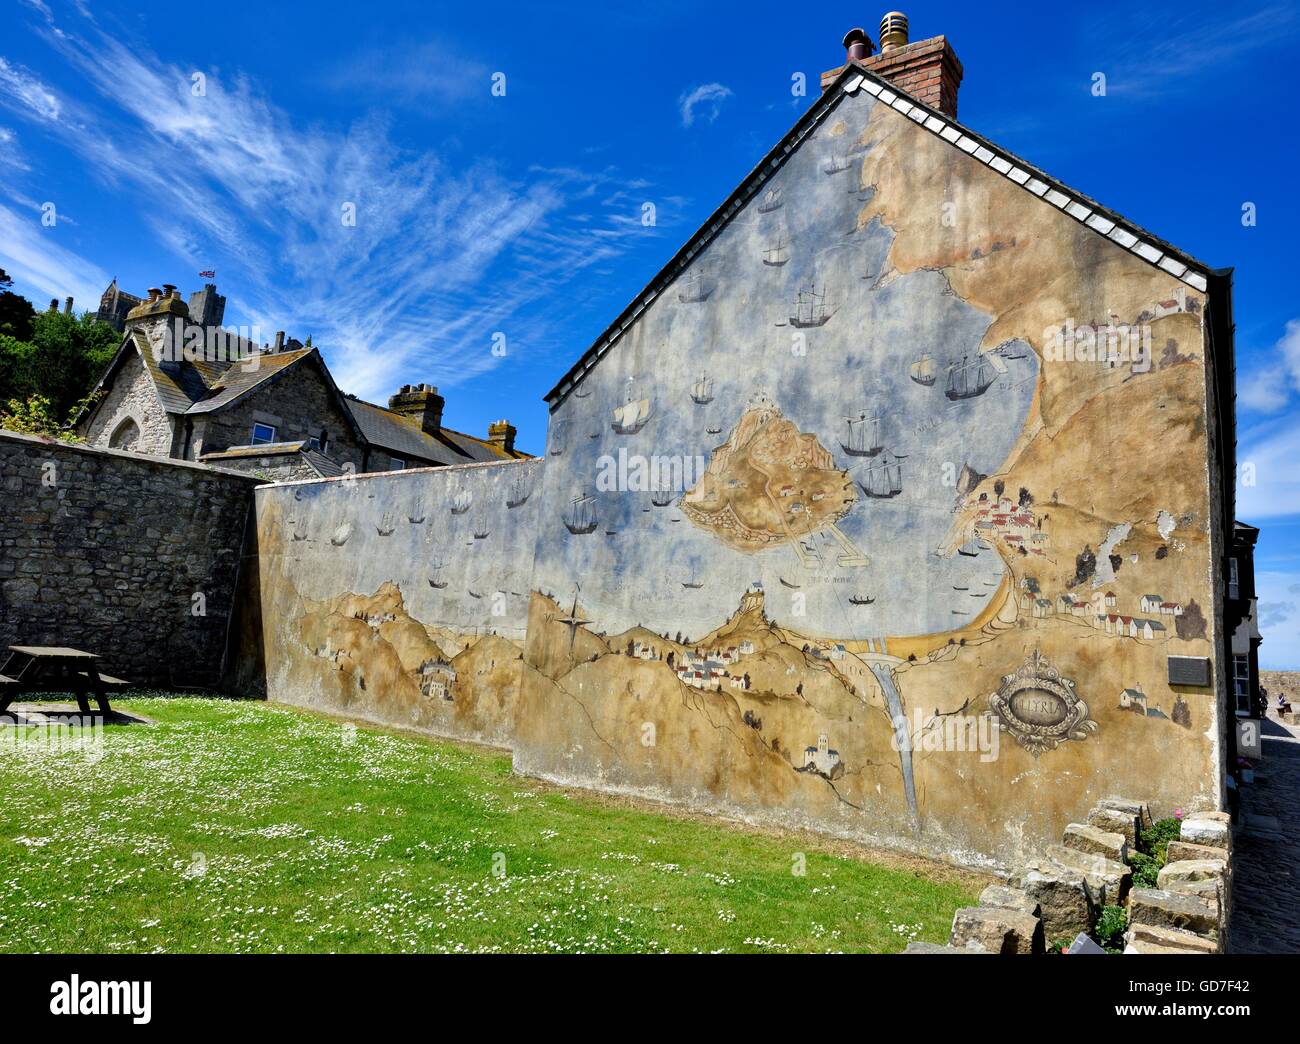 A mural of the story of st.michael's mount on the gable end of a building Cornwall England UK Stock Photo